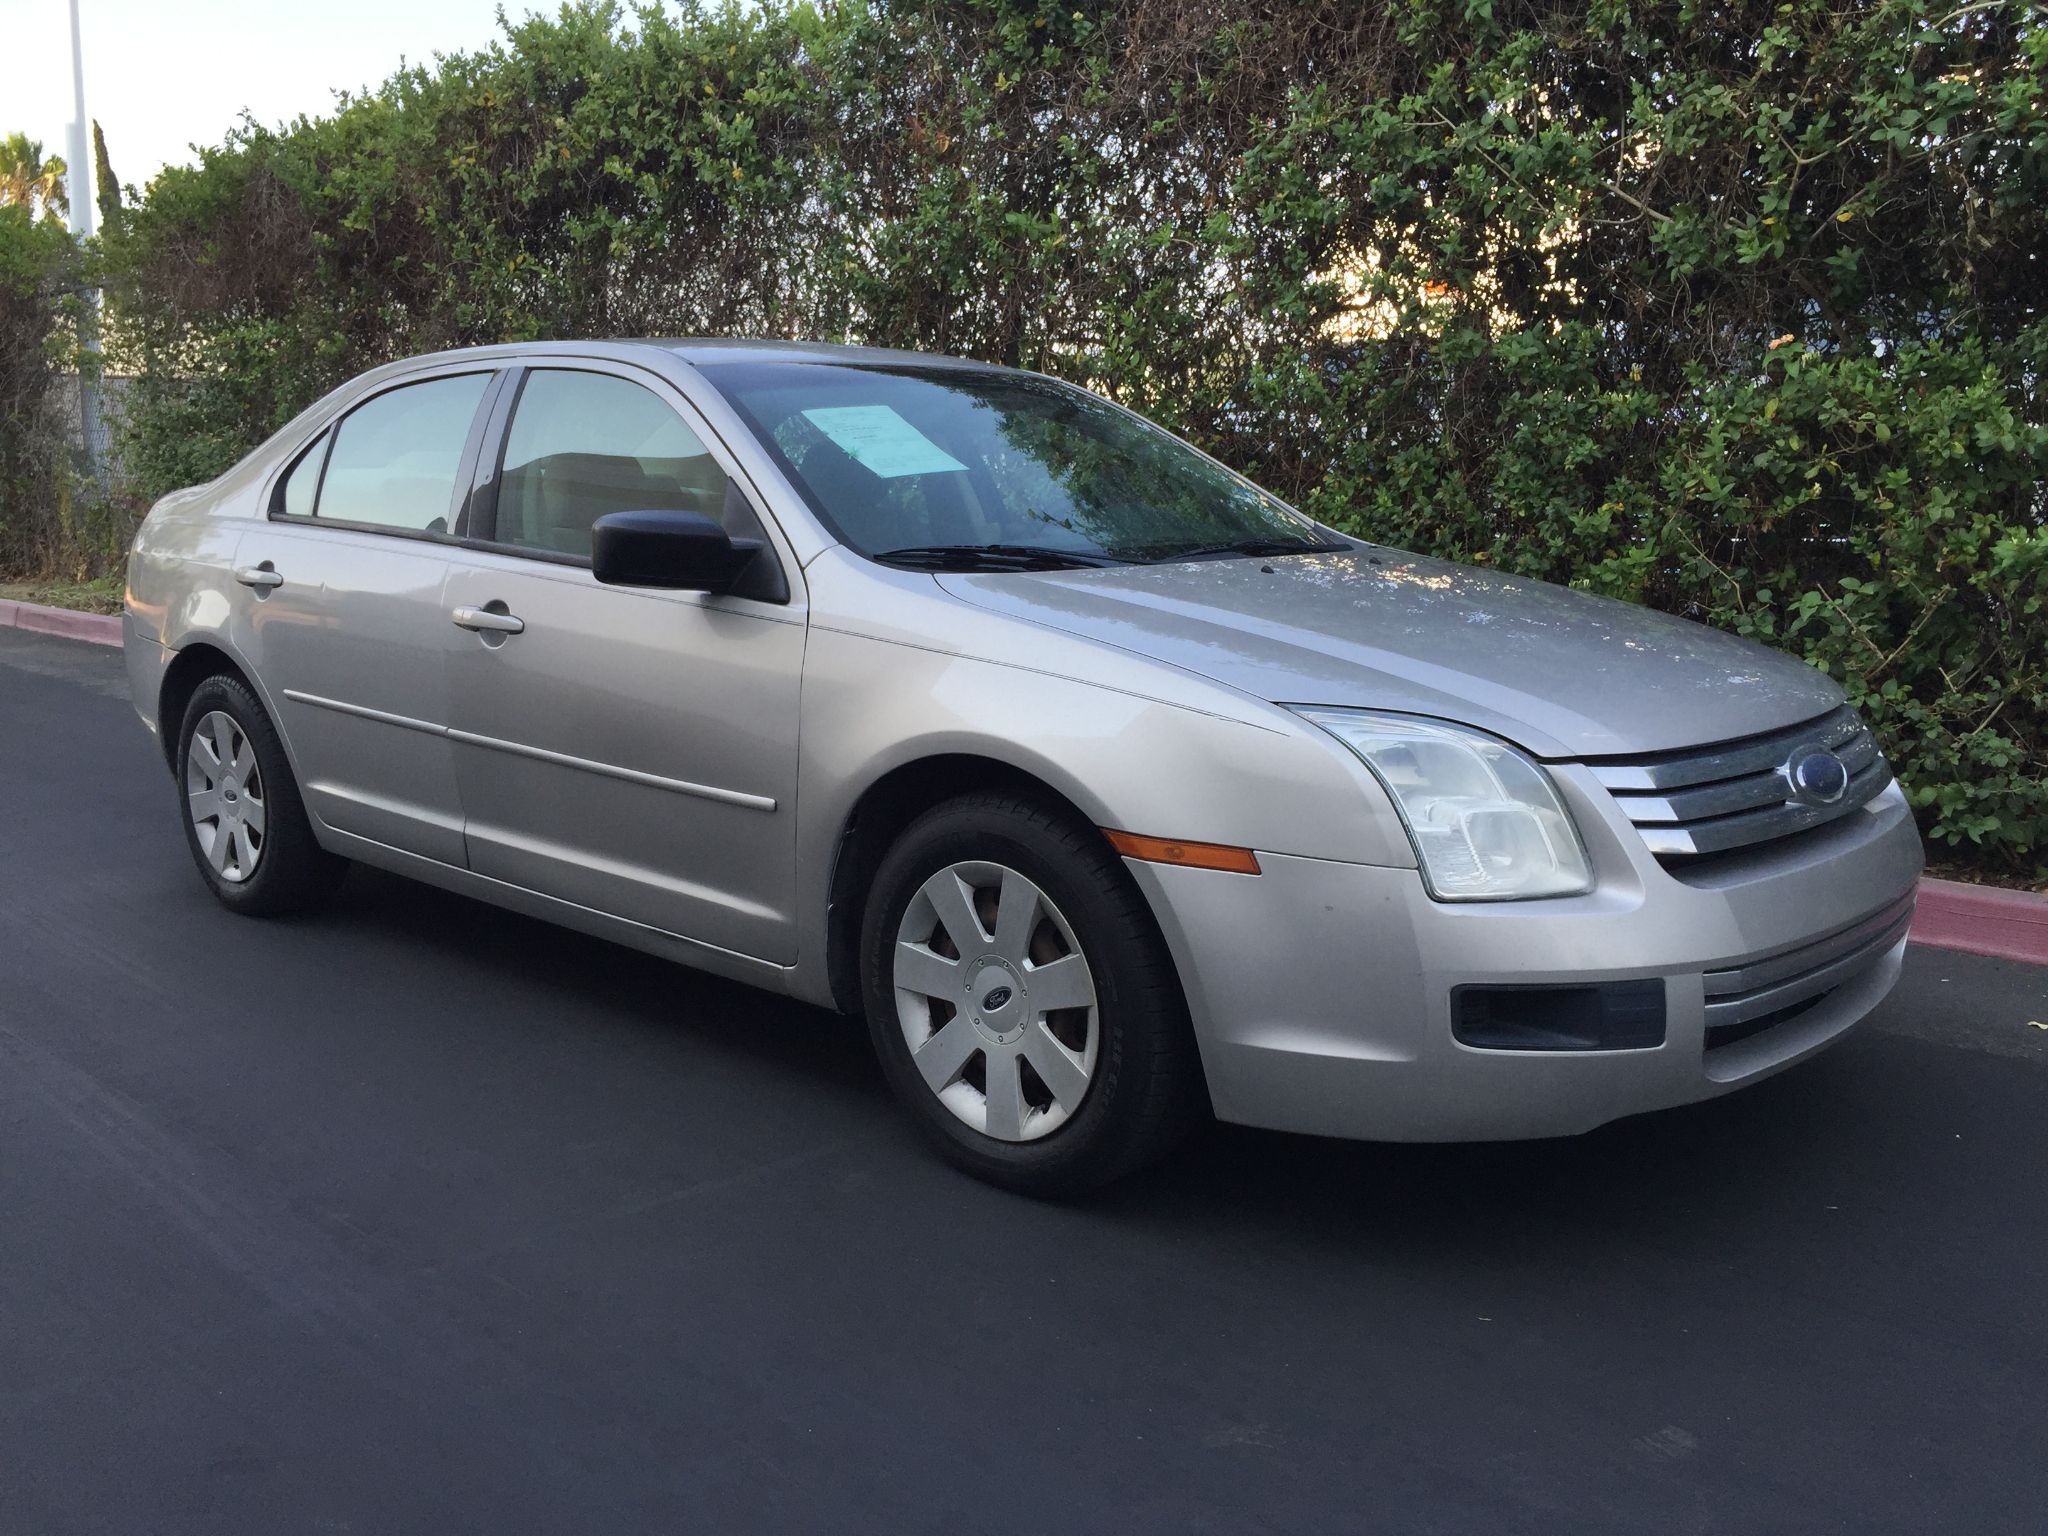 Used 2007 Ford Fusion SE (4-cyl) at City Cars Warehouse INC